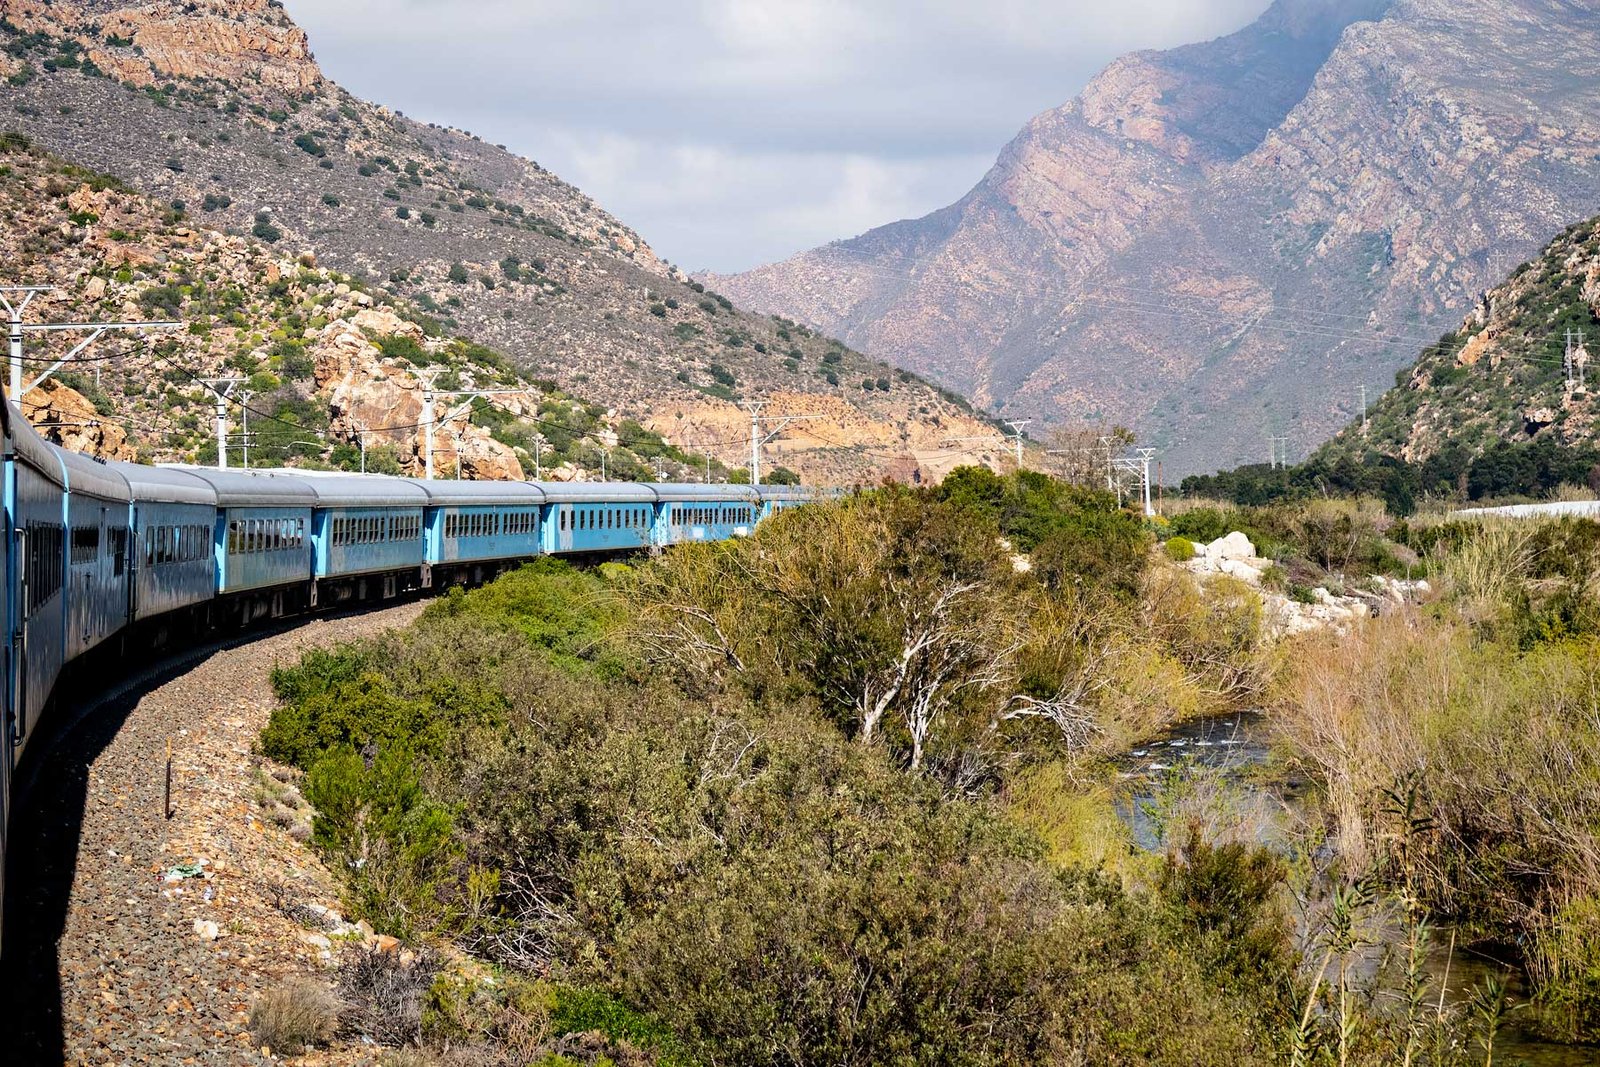 The Most Amazing 28-hour Luxury Train Ride from Johannesburg to Cape Town